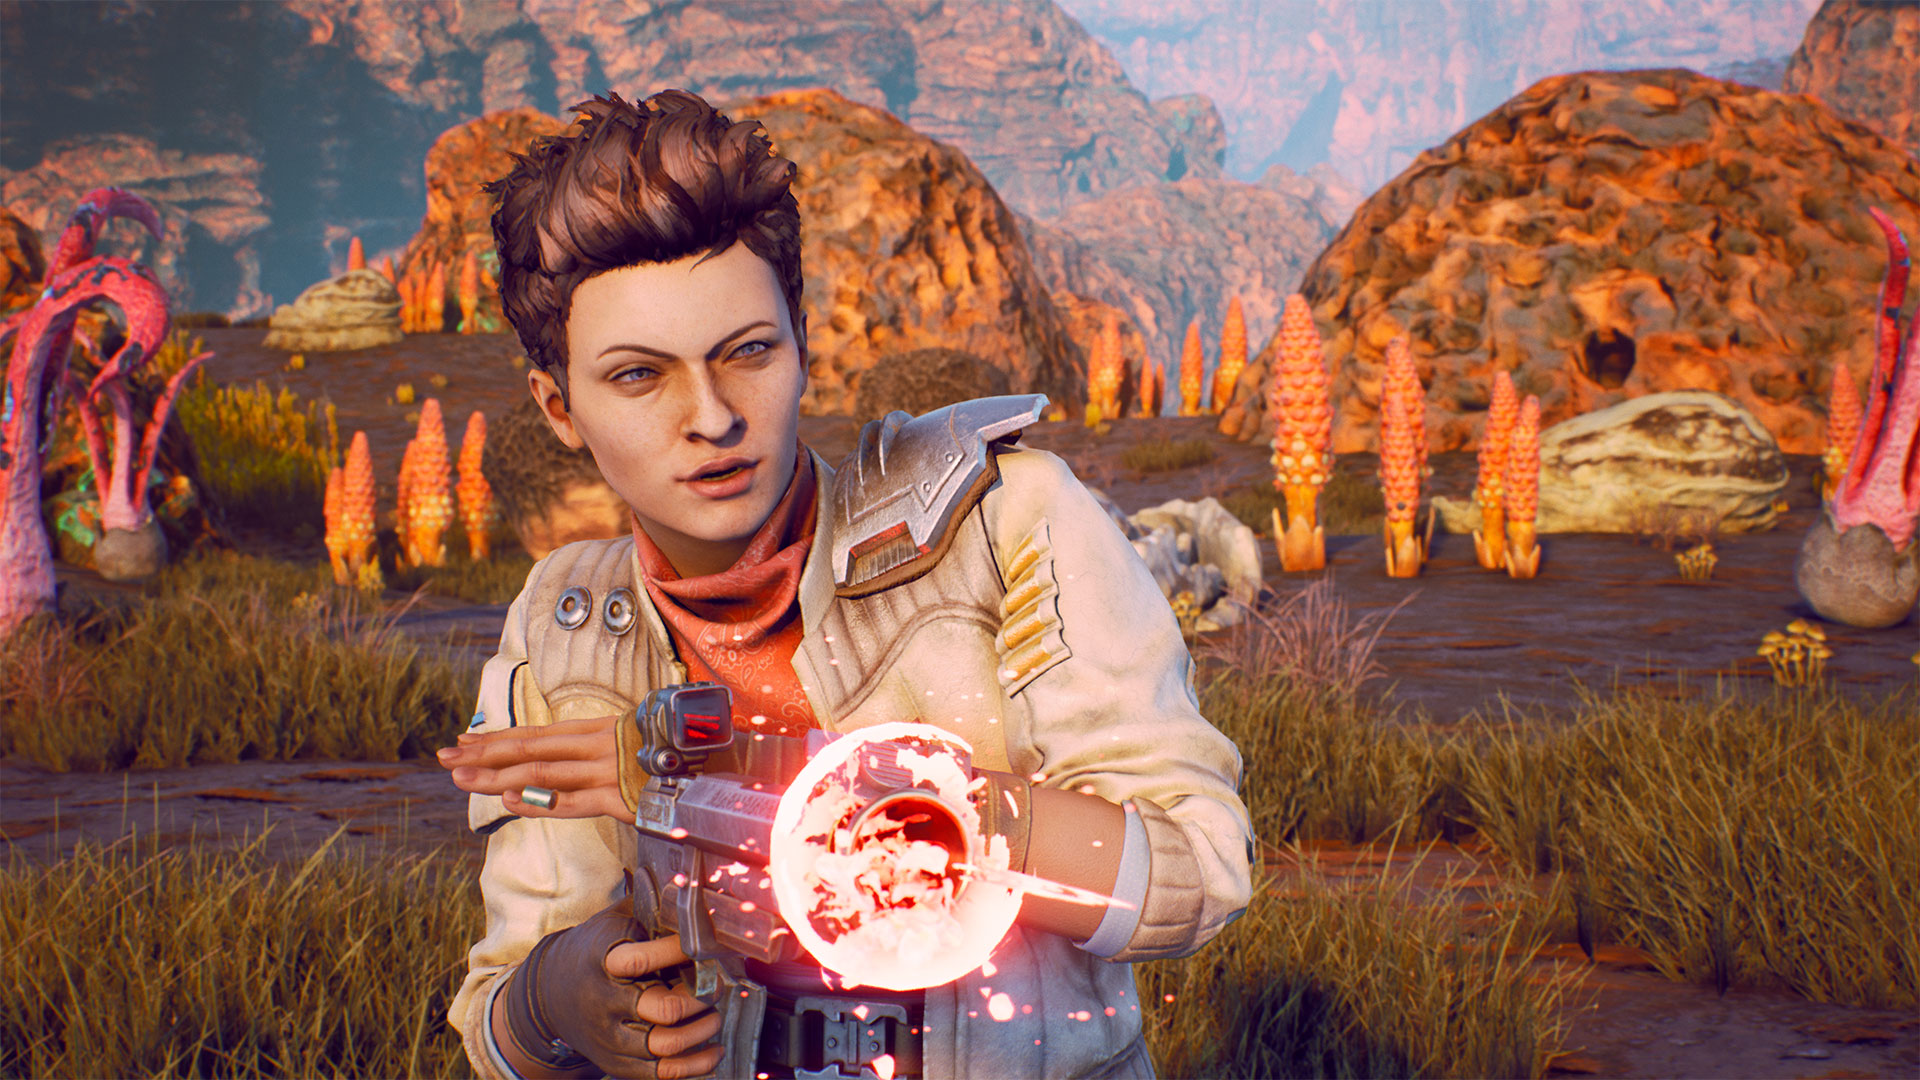 Girl The Outer Worlds 1920x1080